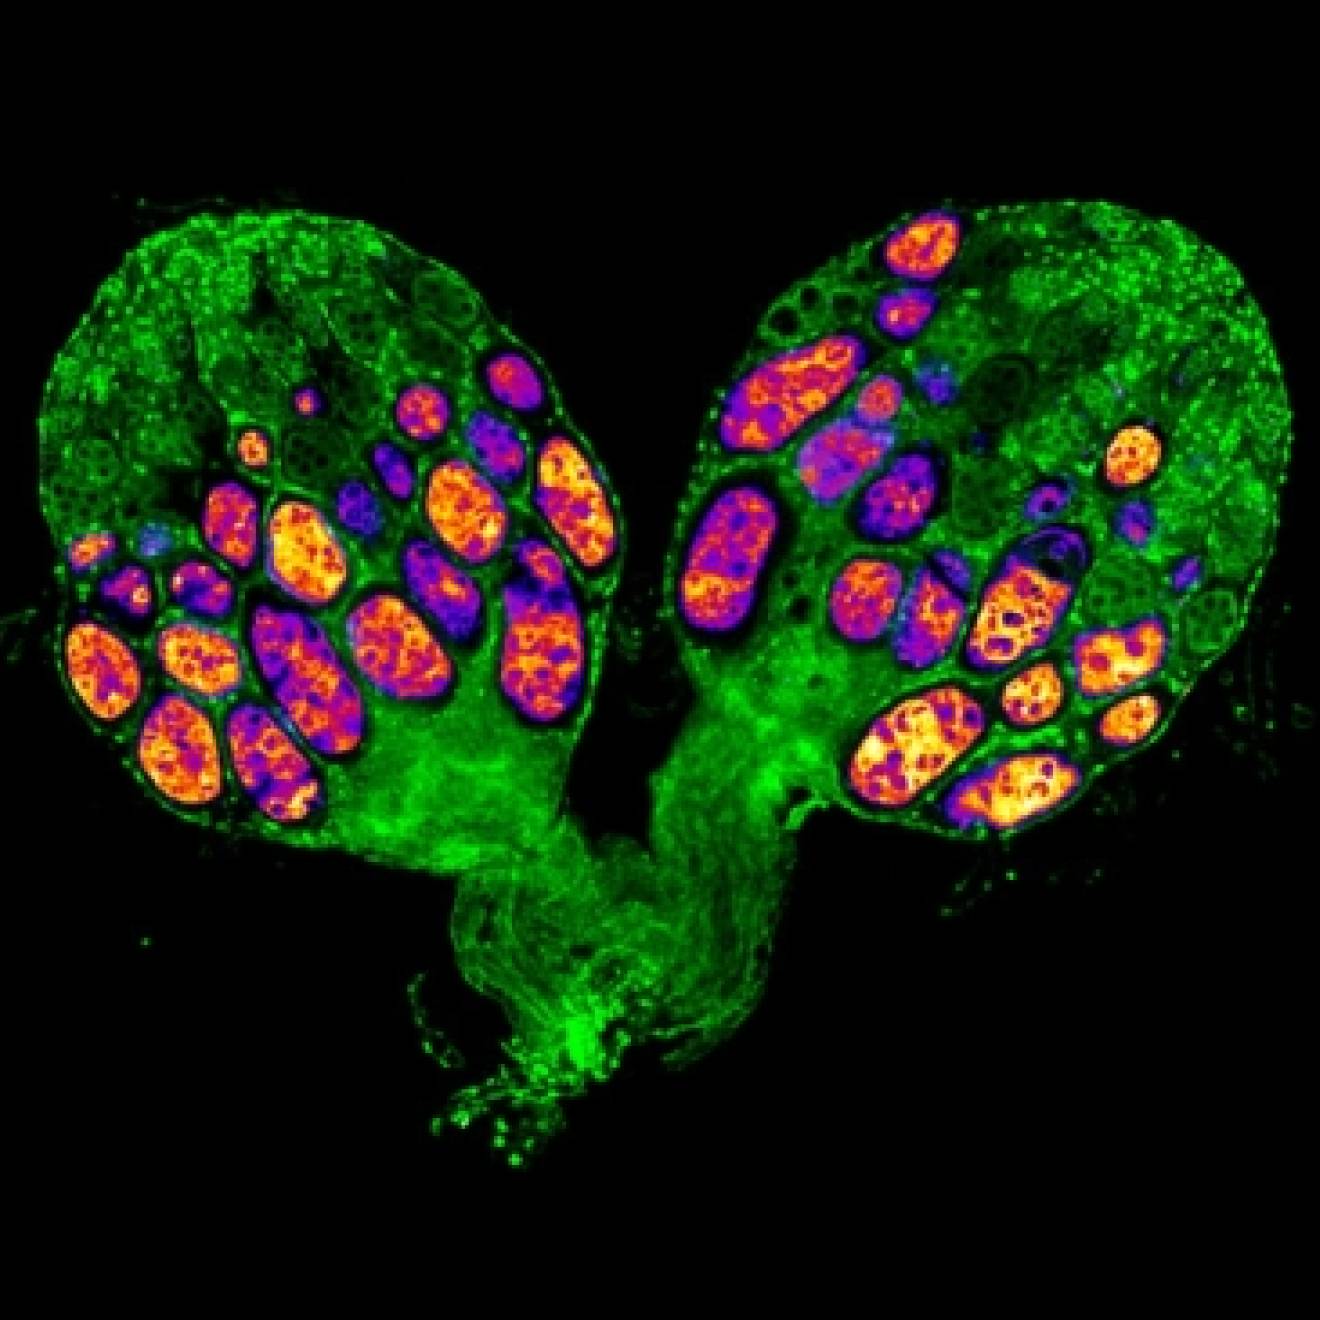 Image of an ovary from a diapausing fruit fly showing arrested egg development.